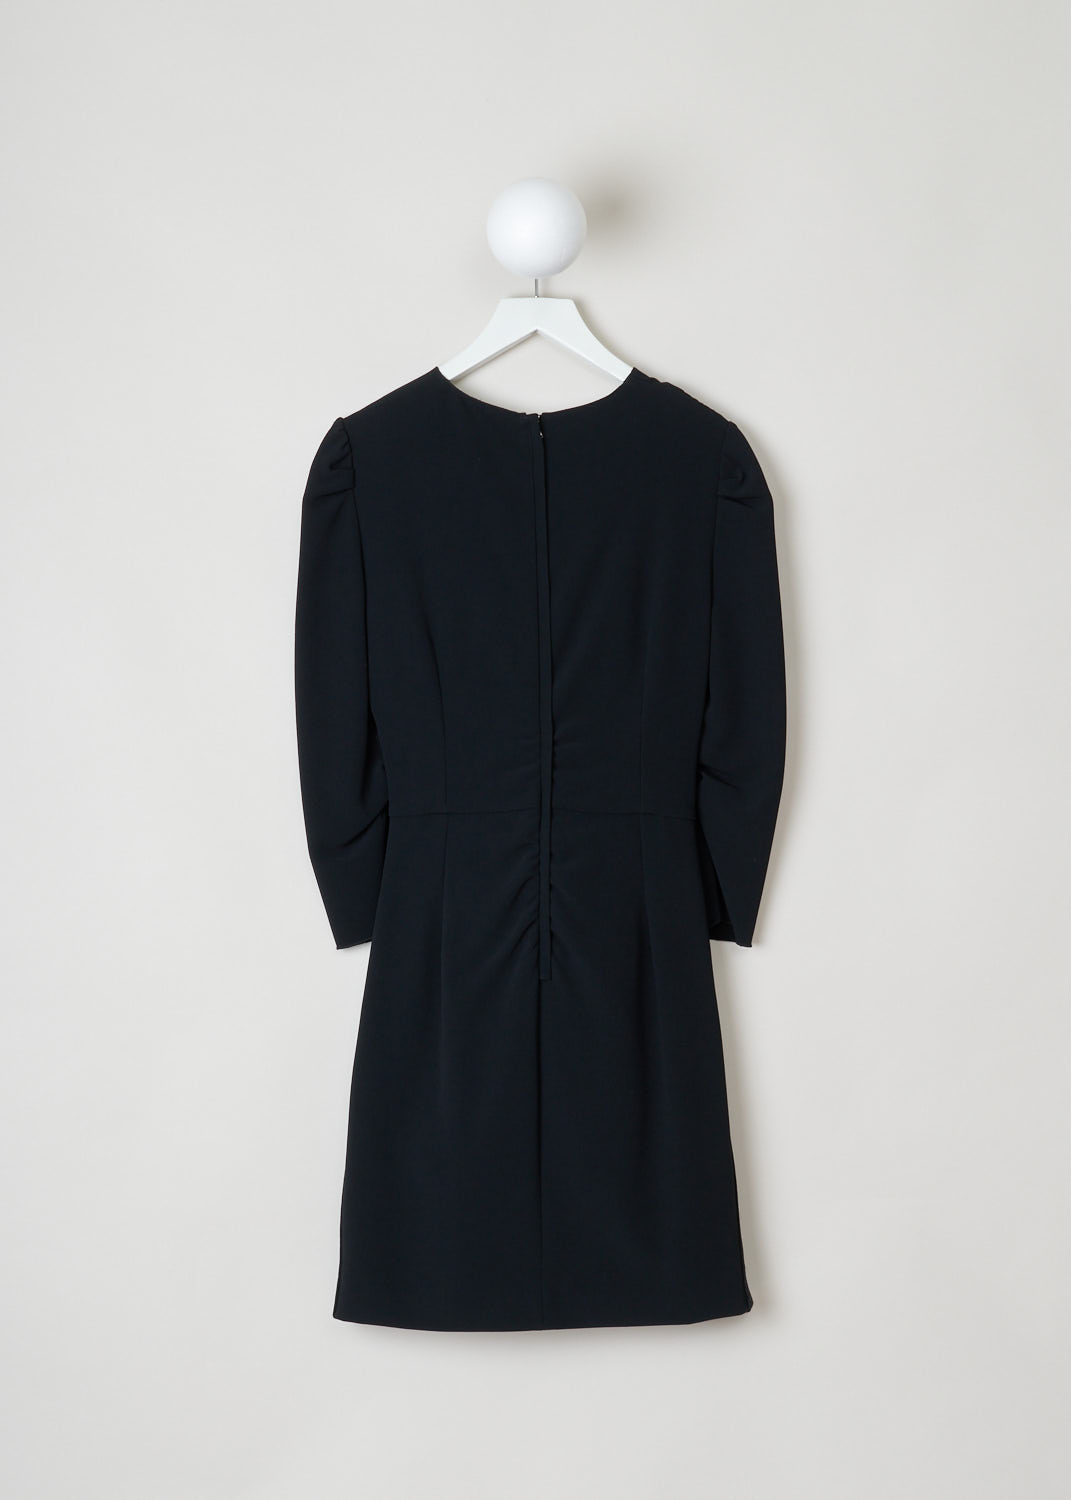 Dolce & Gabbana, Black mid-length dress with draped features, F6BQ0T_FSADD_X0873, black, back, Black draped dress featuring a round neckline, 3/4 sleeve length with a midi dress length. Pleats staring on the shoulder flow down the dress, with similar pleats starting on waist height.  